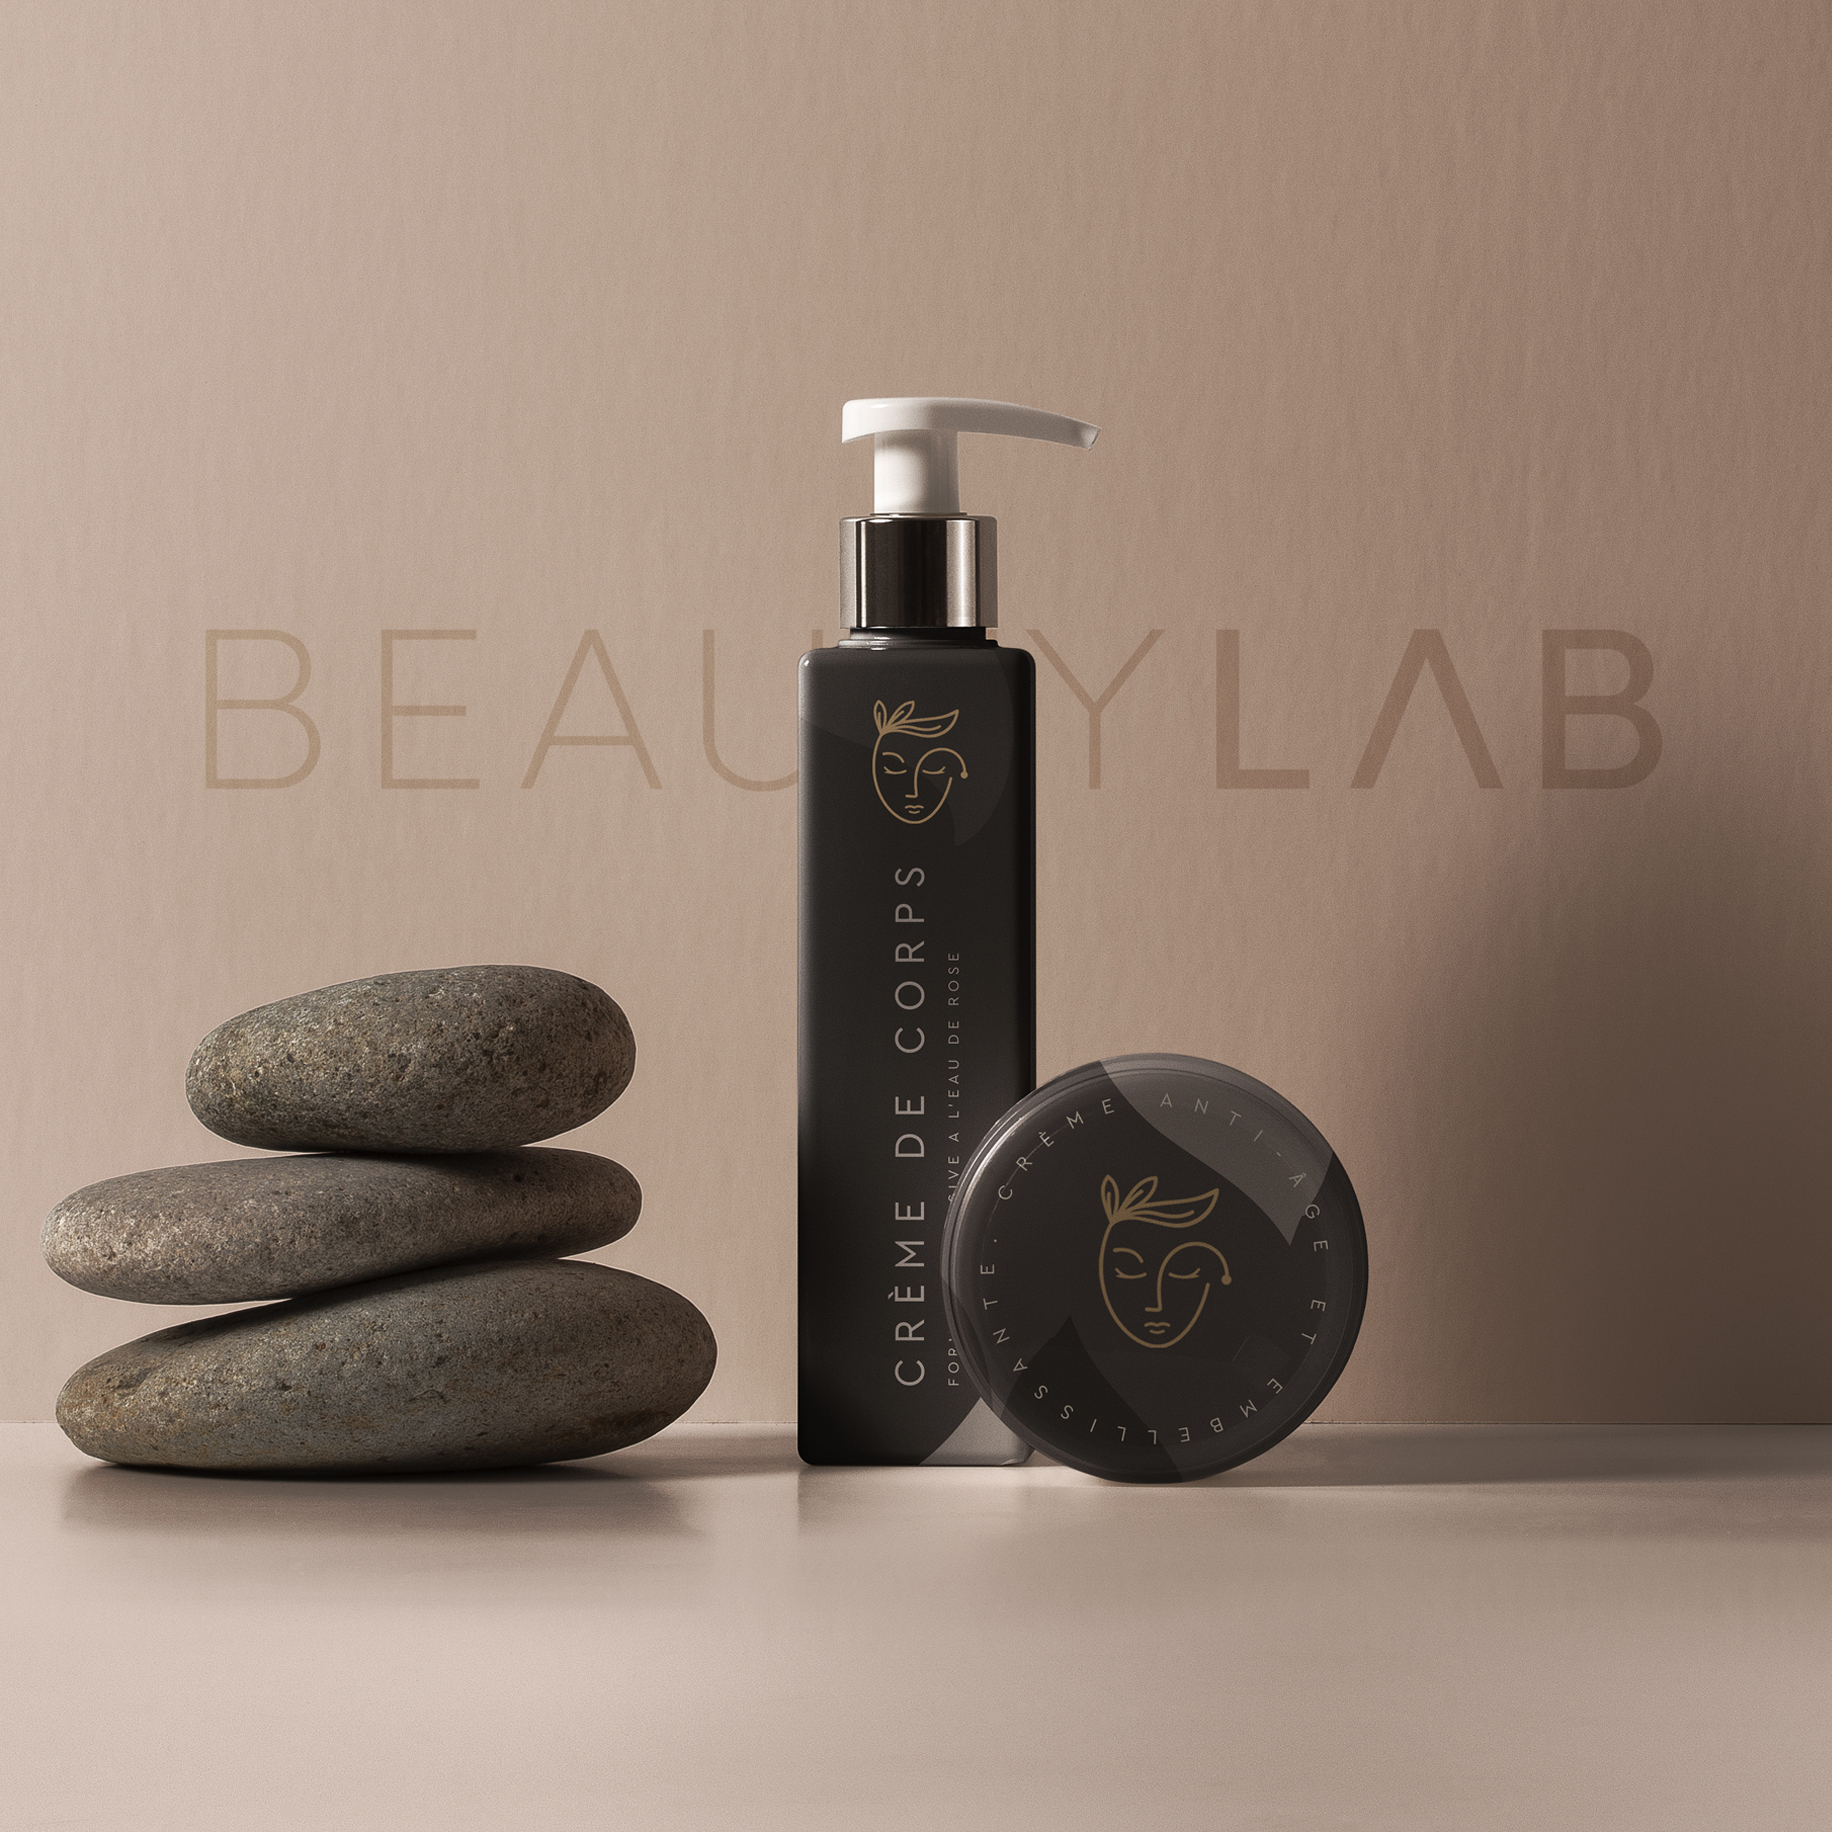 Beauty Lab packaging design